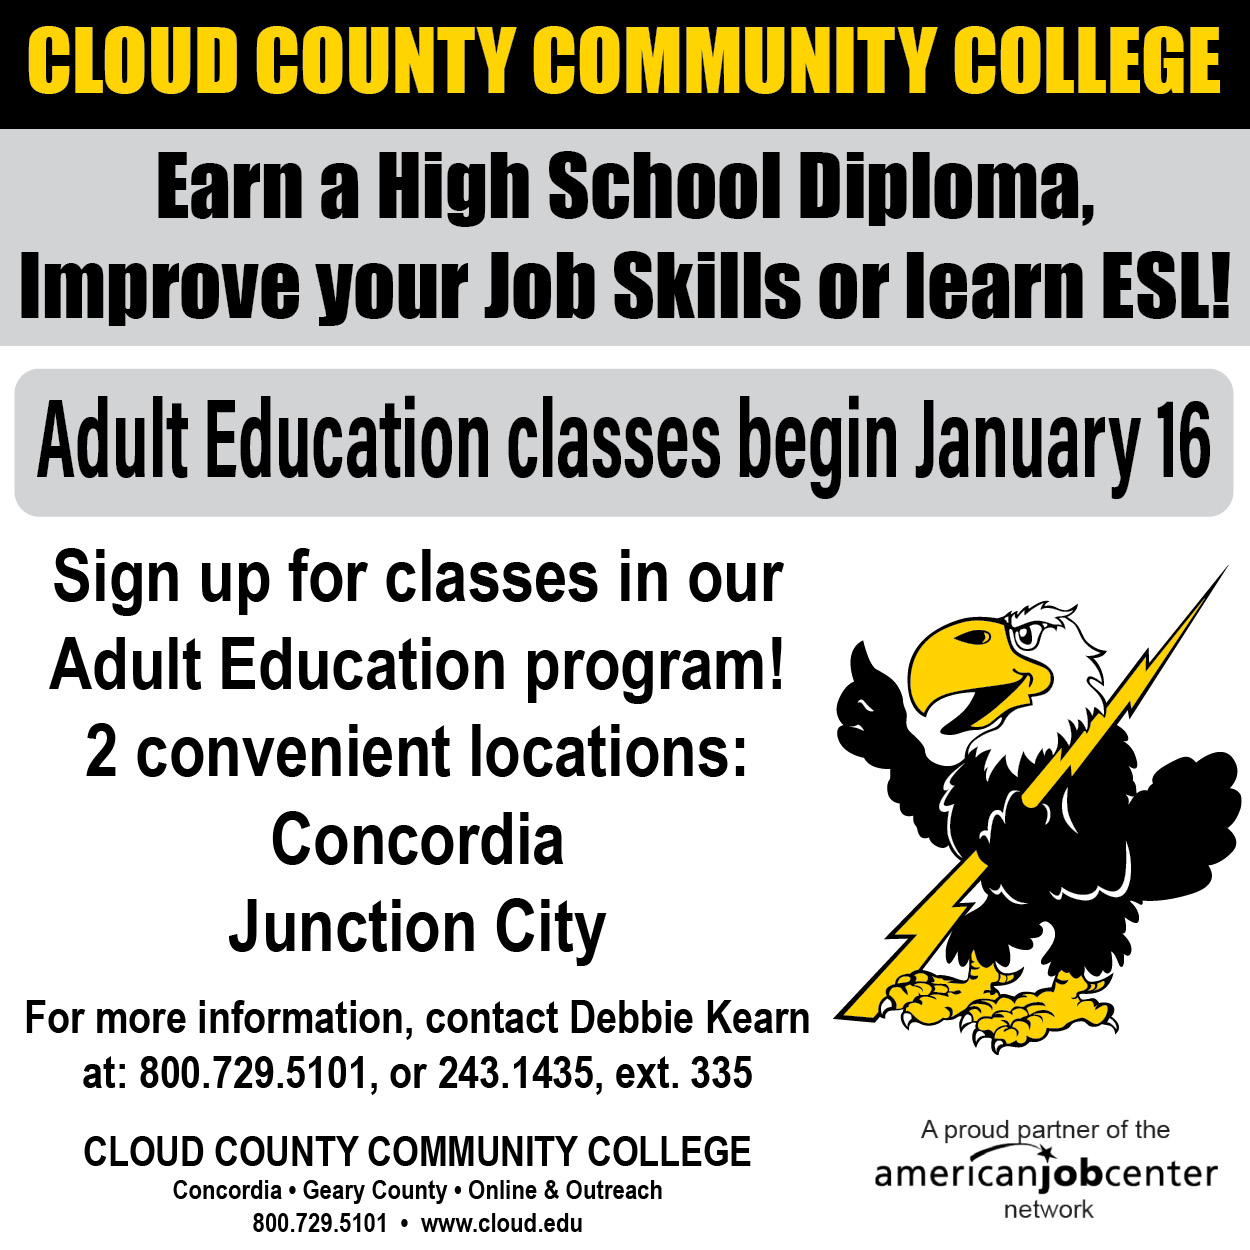 Courses to be offered in the Adult Education program.